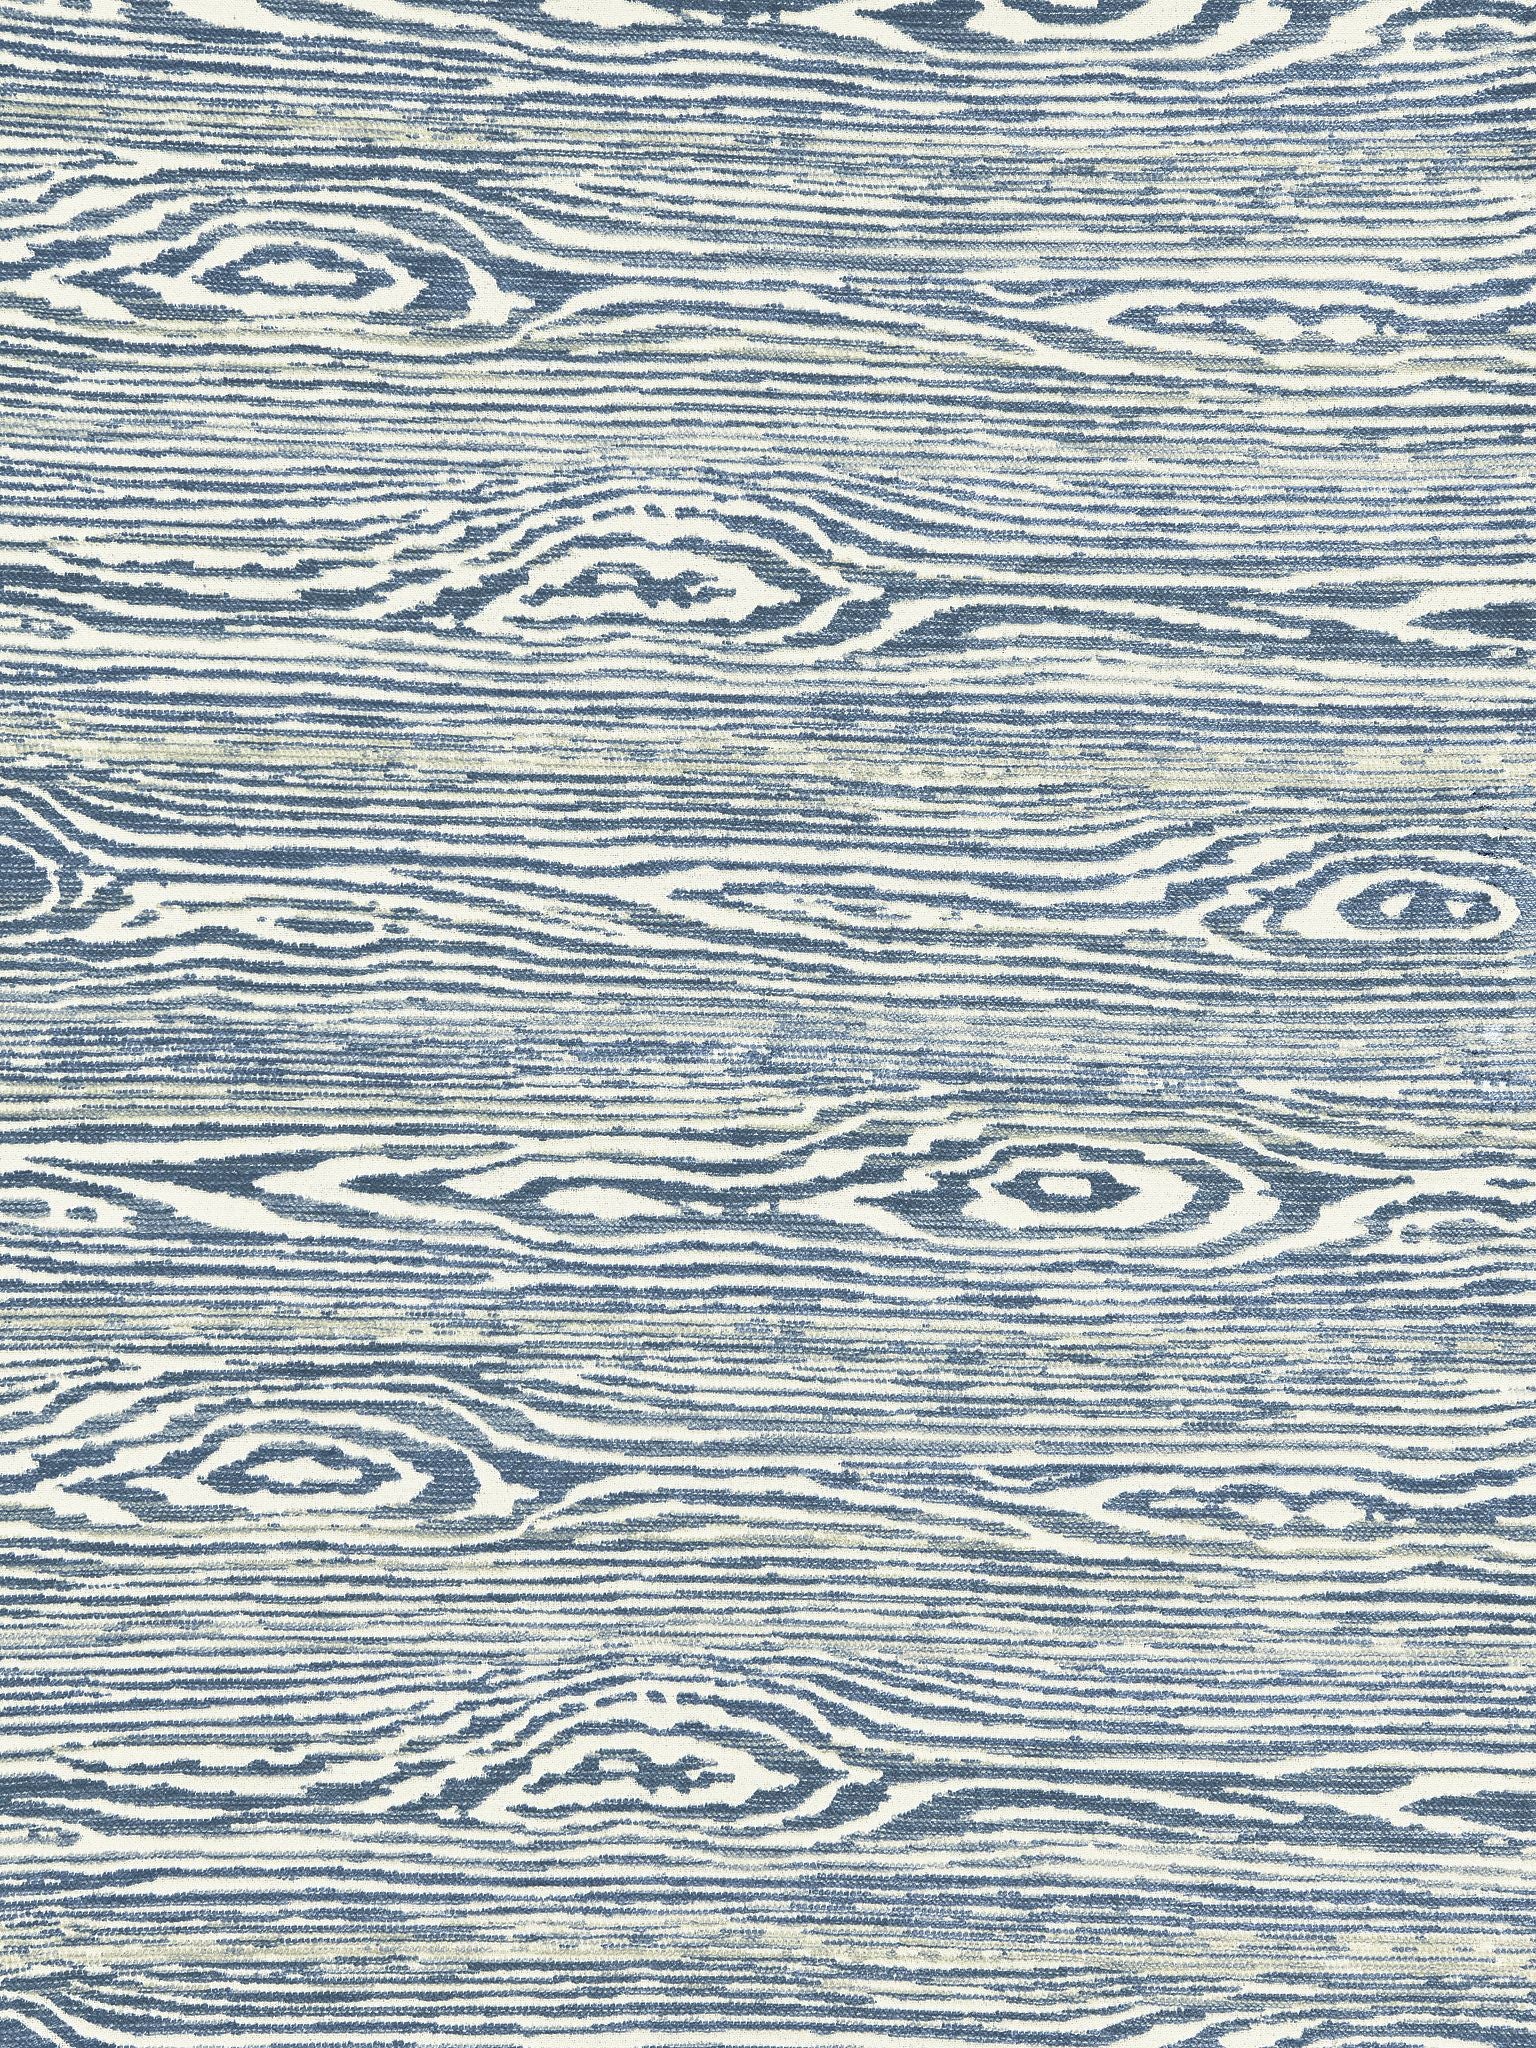 Muir Woods fabric in wedgwood color - pattern number CD 0052OB41 - by Scalamandre in the Old World Weavers collection